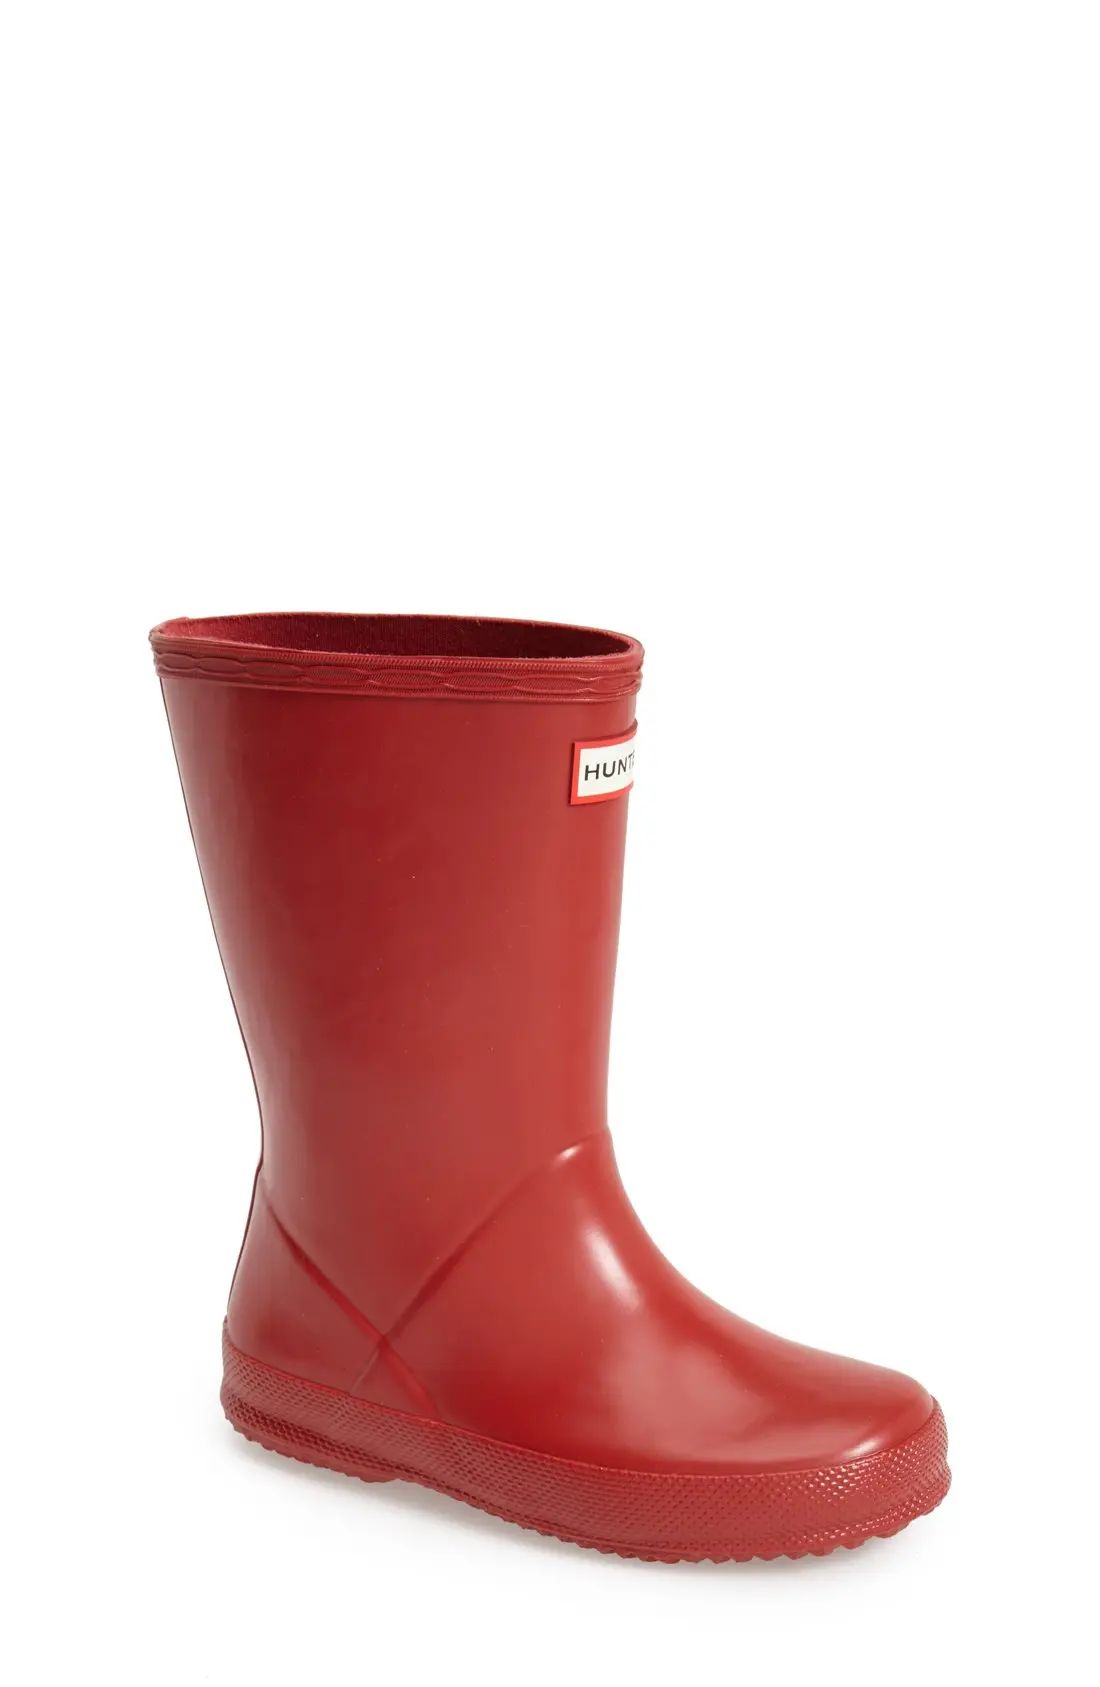 Toddler Hunter First Classic Waterproof Rain Boot, Size 10 M - Red | Nordstrom